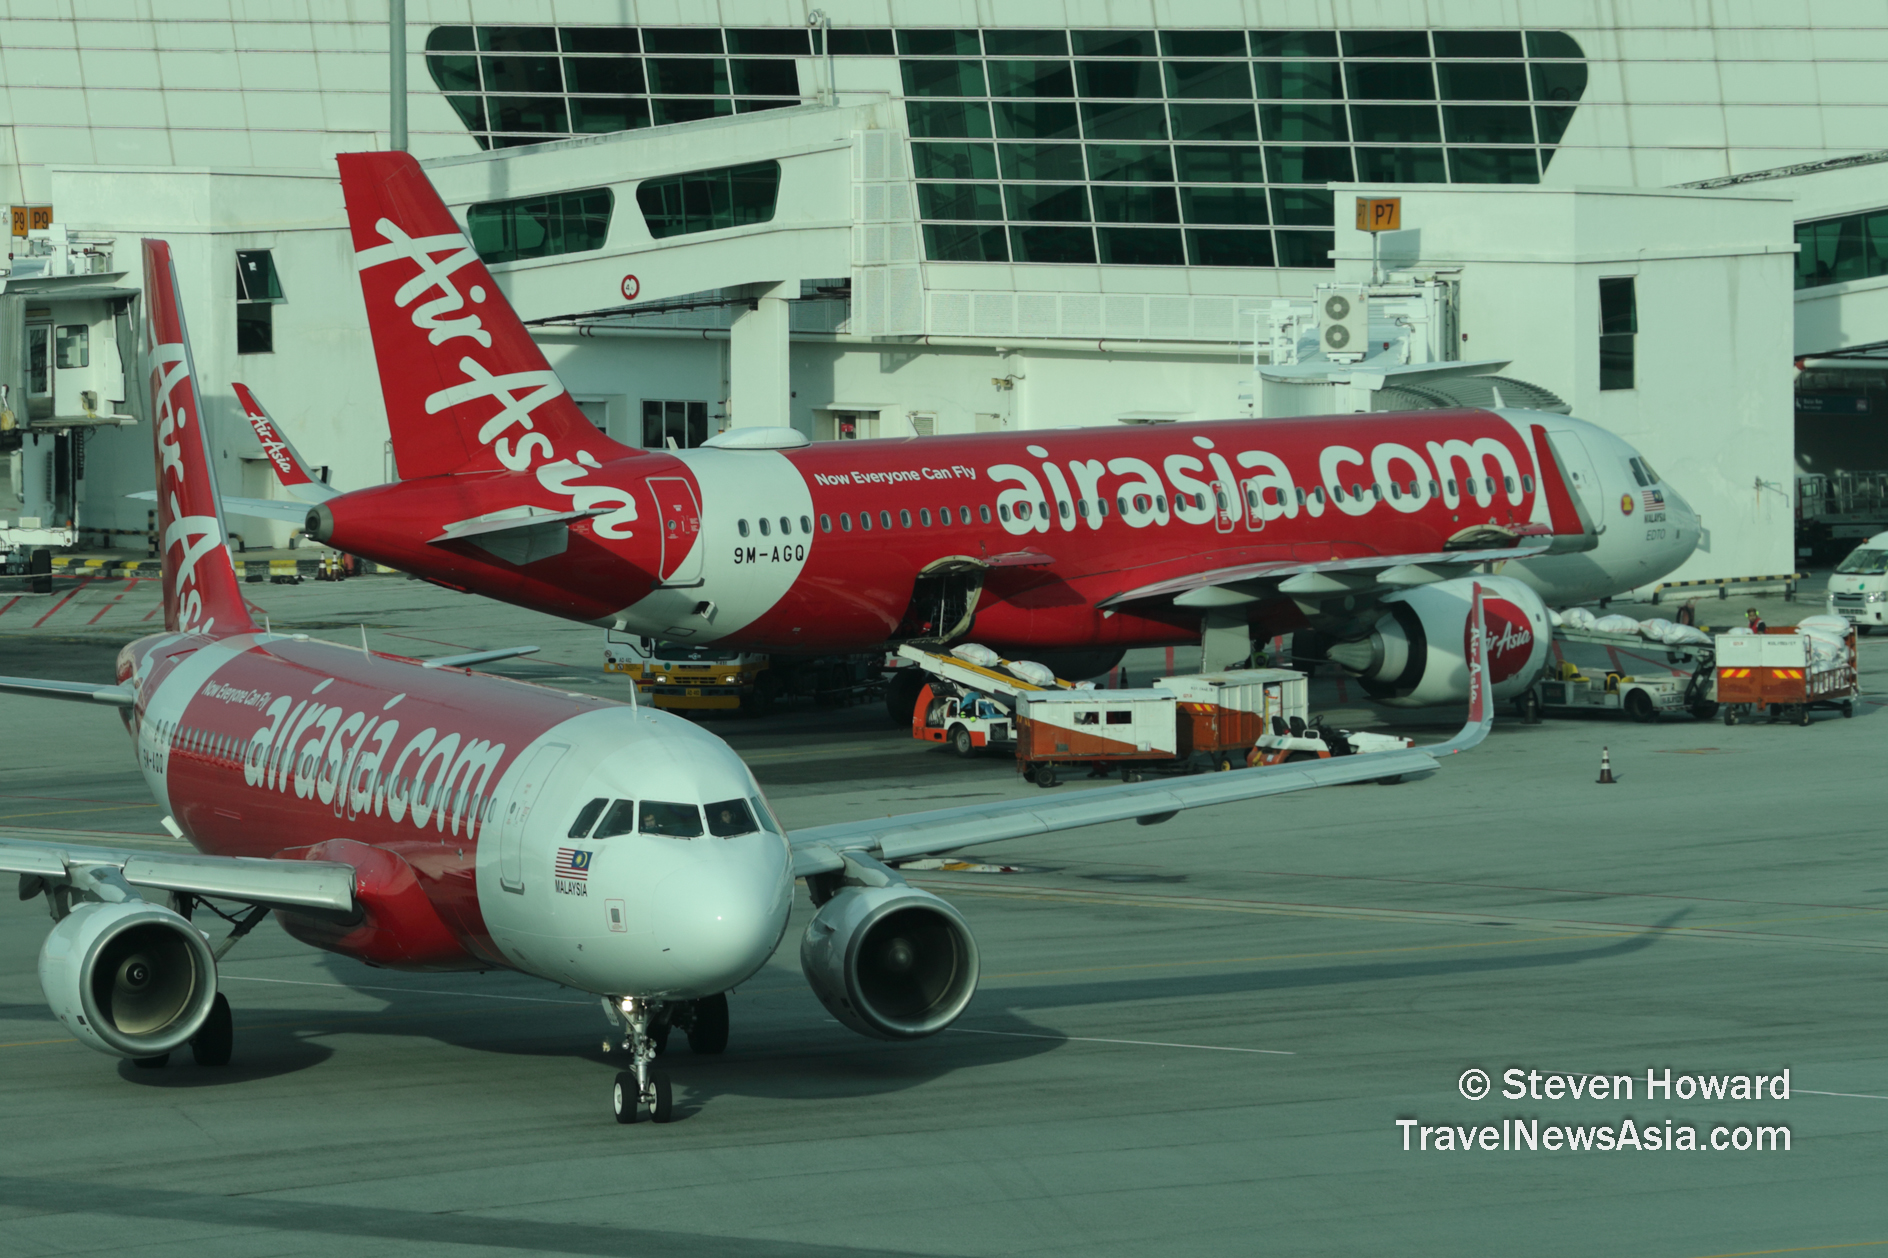 AirAsia Malaysia A320s at KUL. Picture by Steven Howard of TravelNewsAsia.com Click to enlarge.